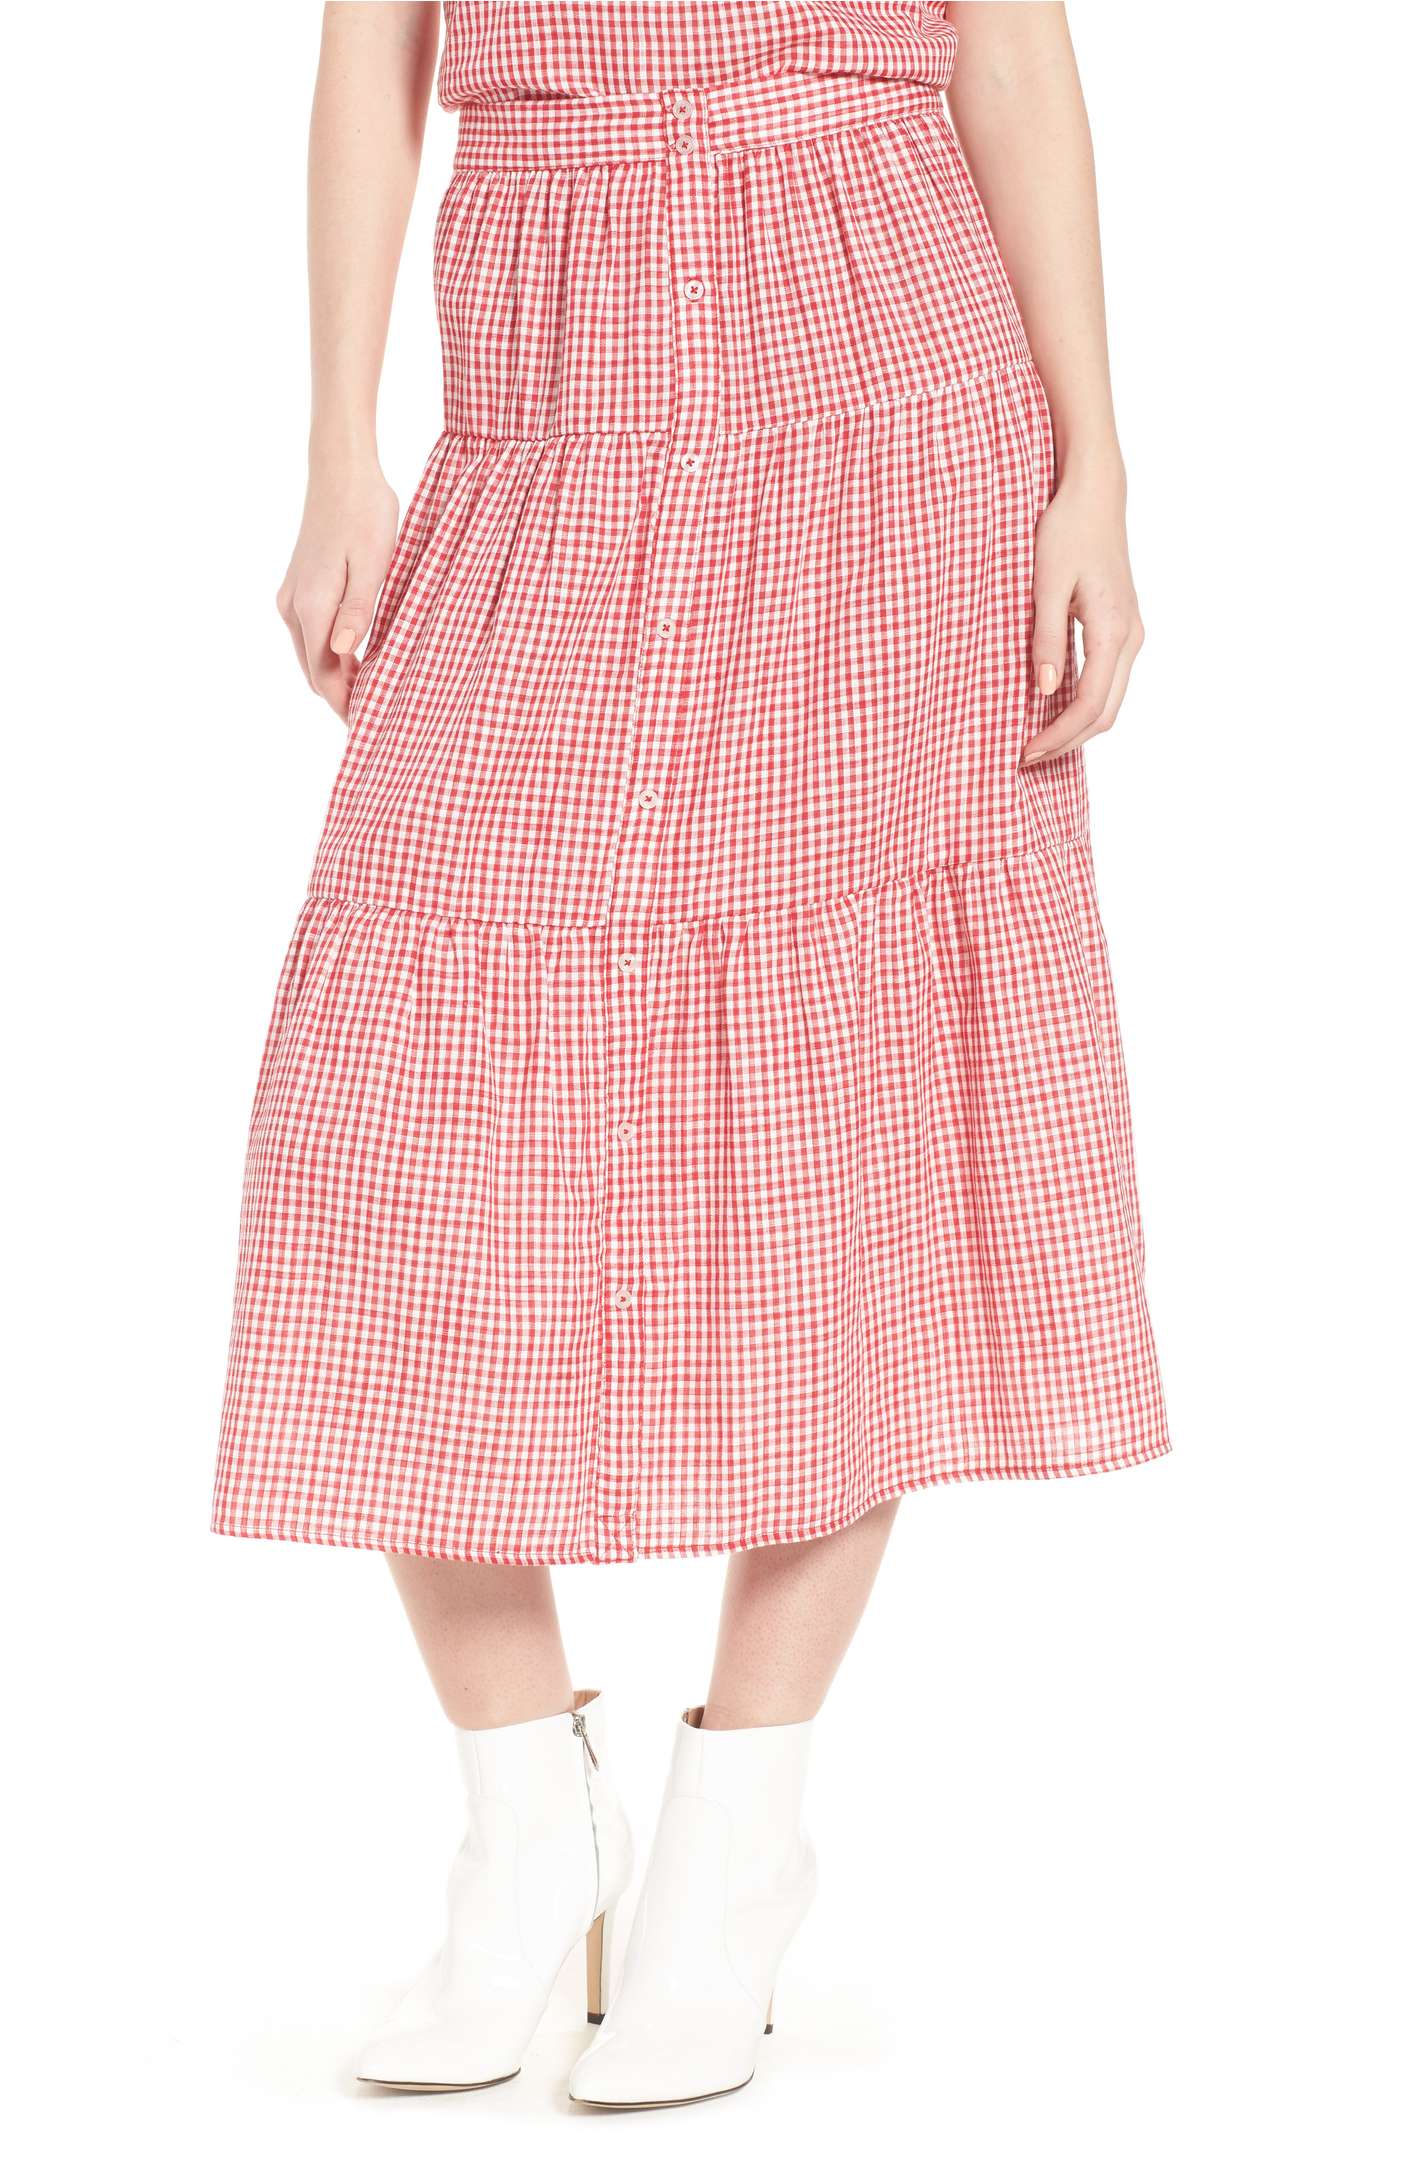 Bring on the Gingham | I WANT TO BE HER!